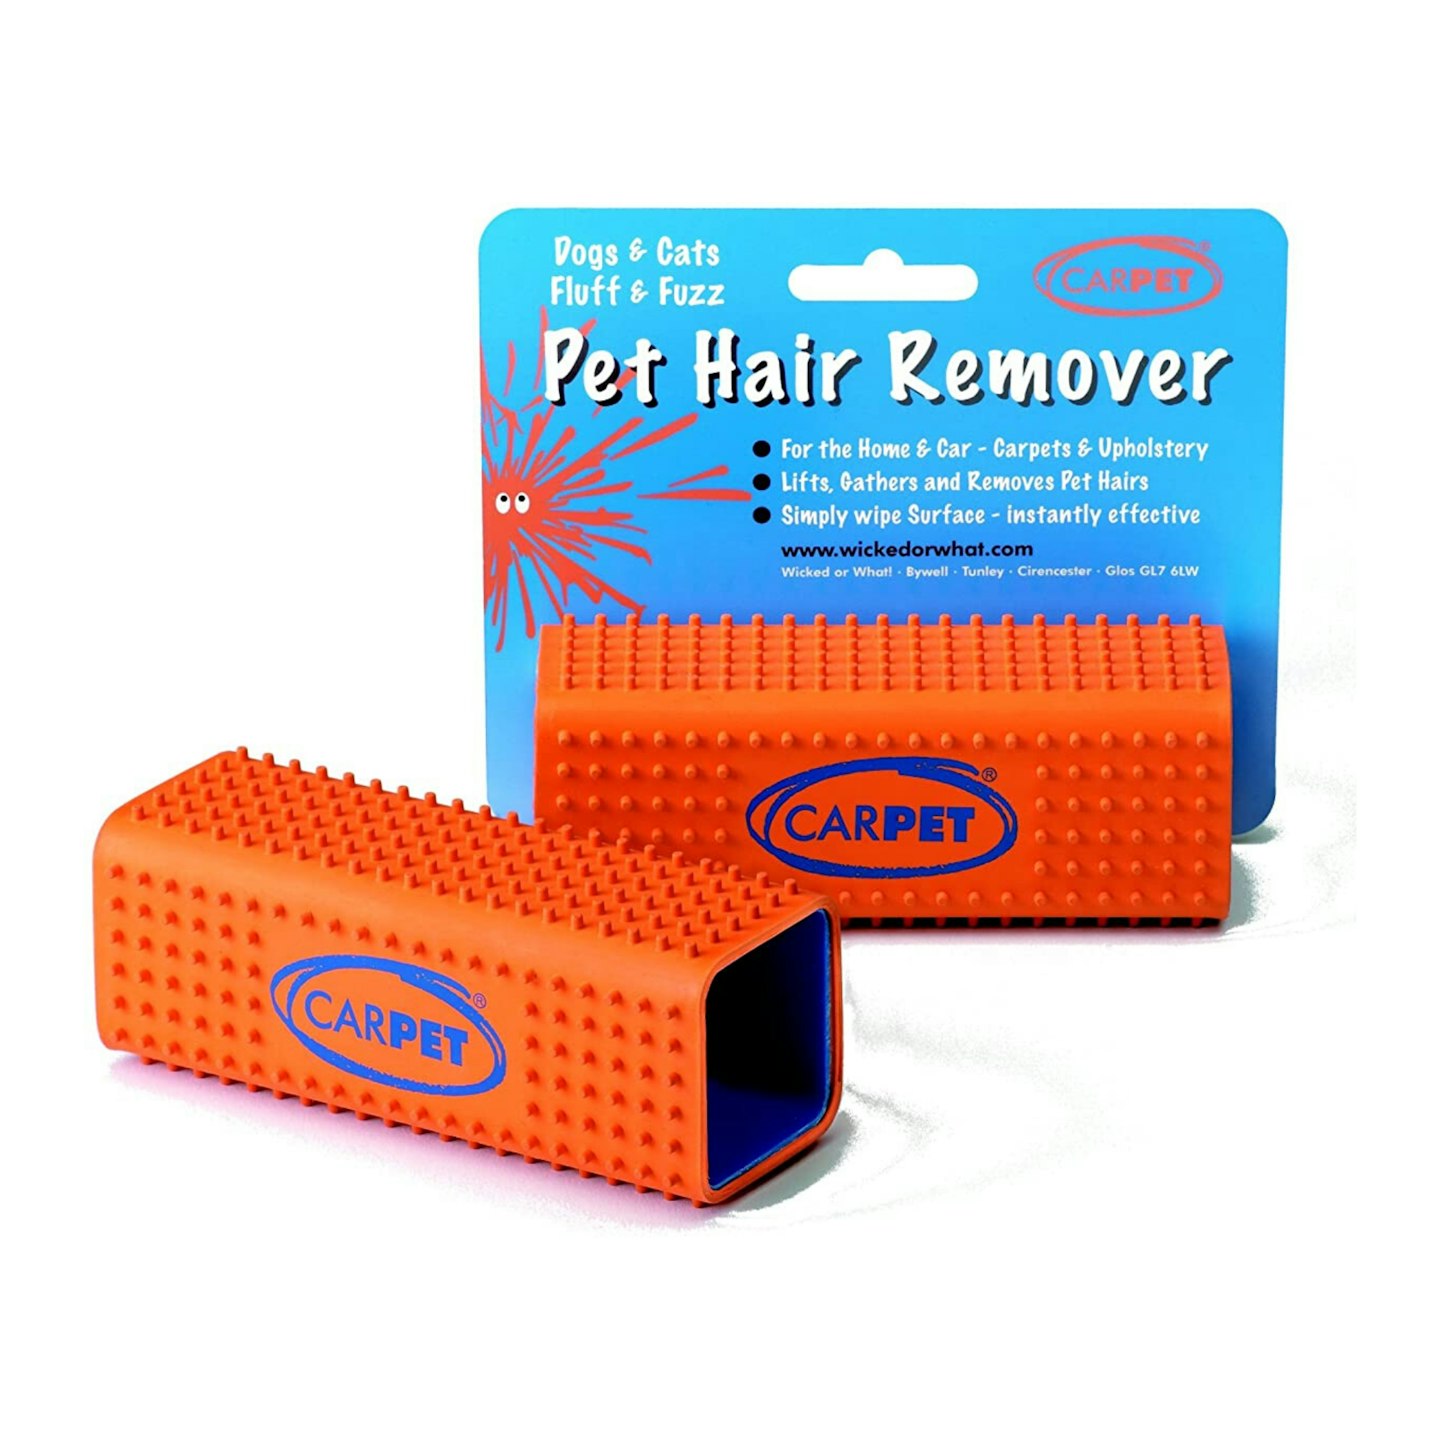 The Carpet Pet Hair Remover, Pack of 2